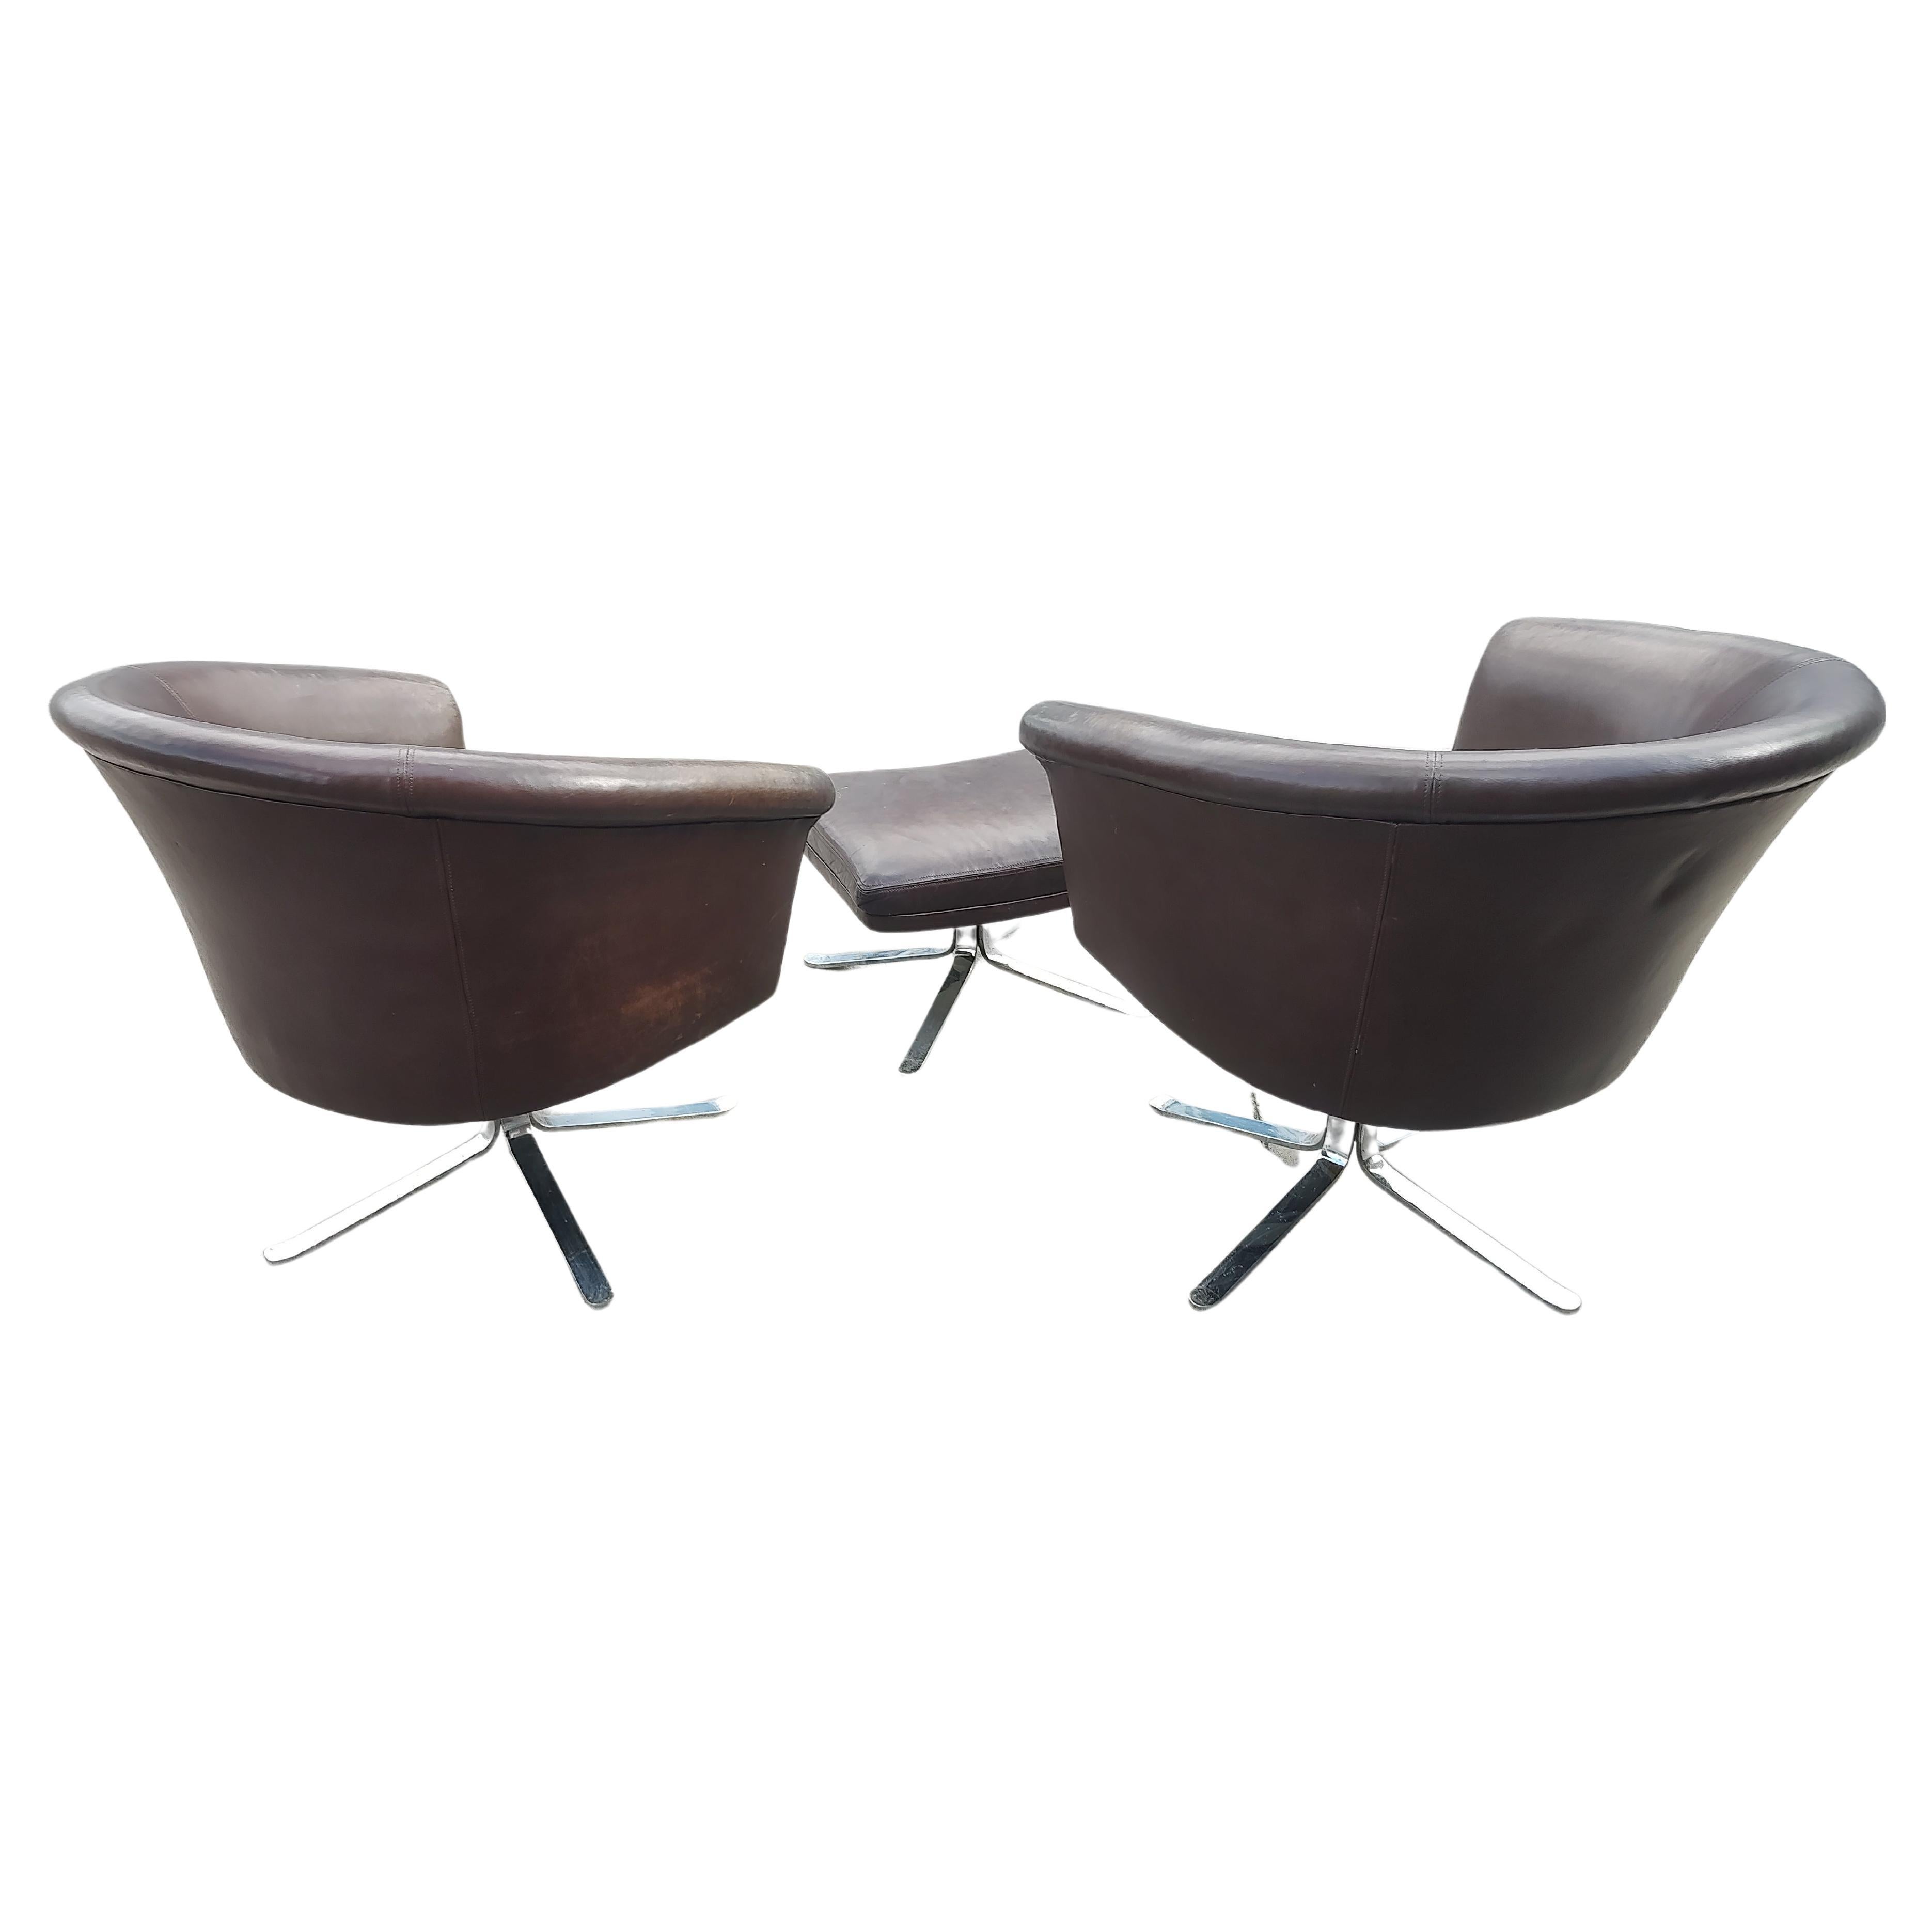 Steel Pair of Mid Century Modern Leather Swiveling Lounge Chairs with an Ottoman C1965 For Sale